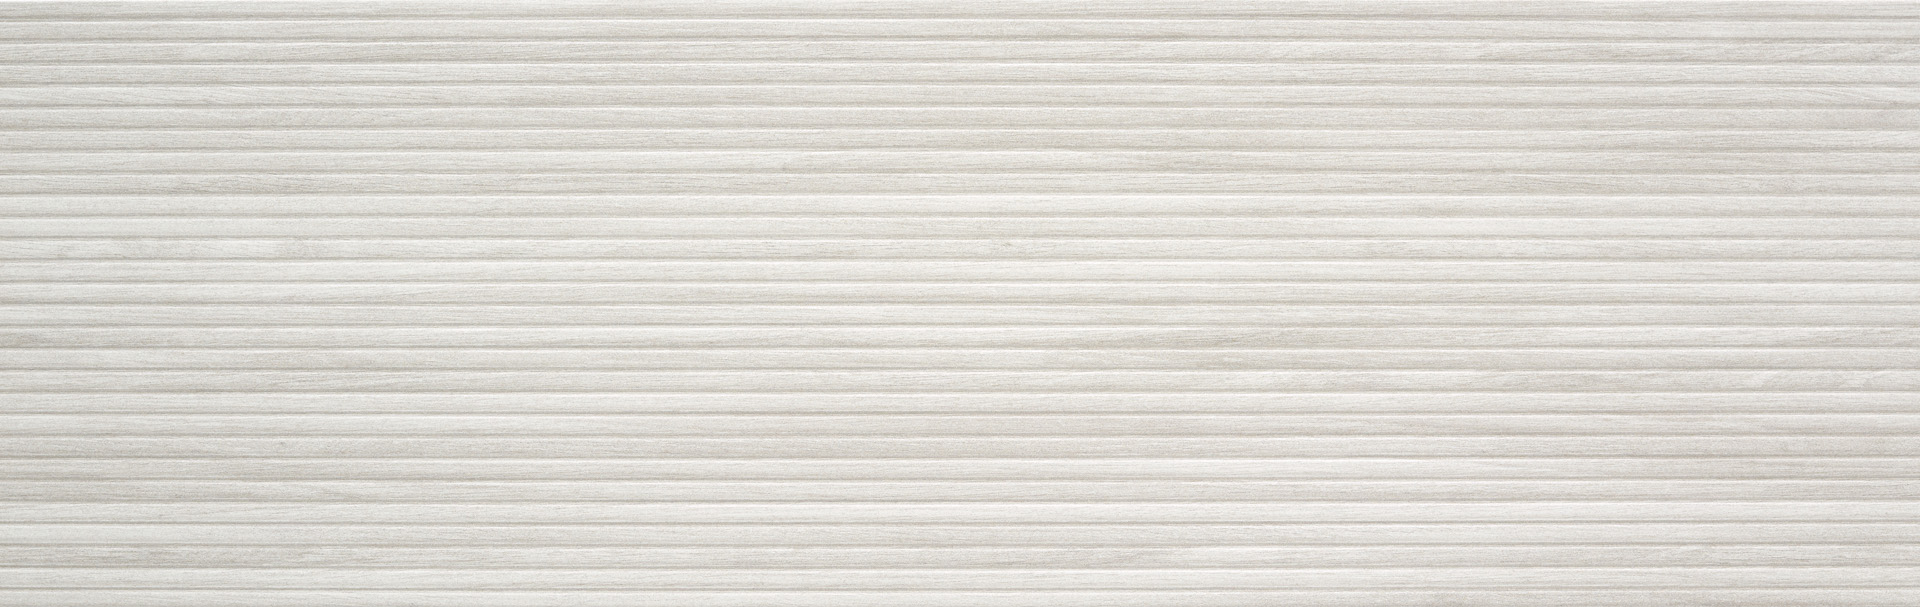 12.64  X 40 Linnear White textured Rectified Wall Tile